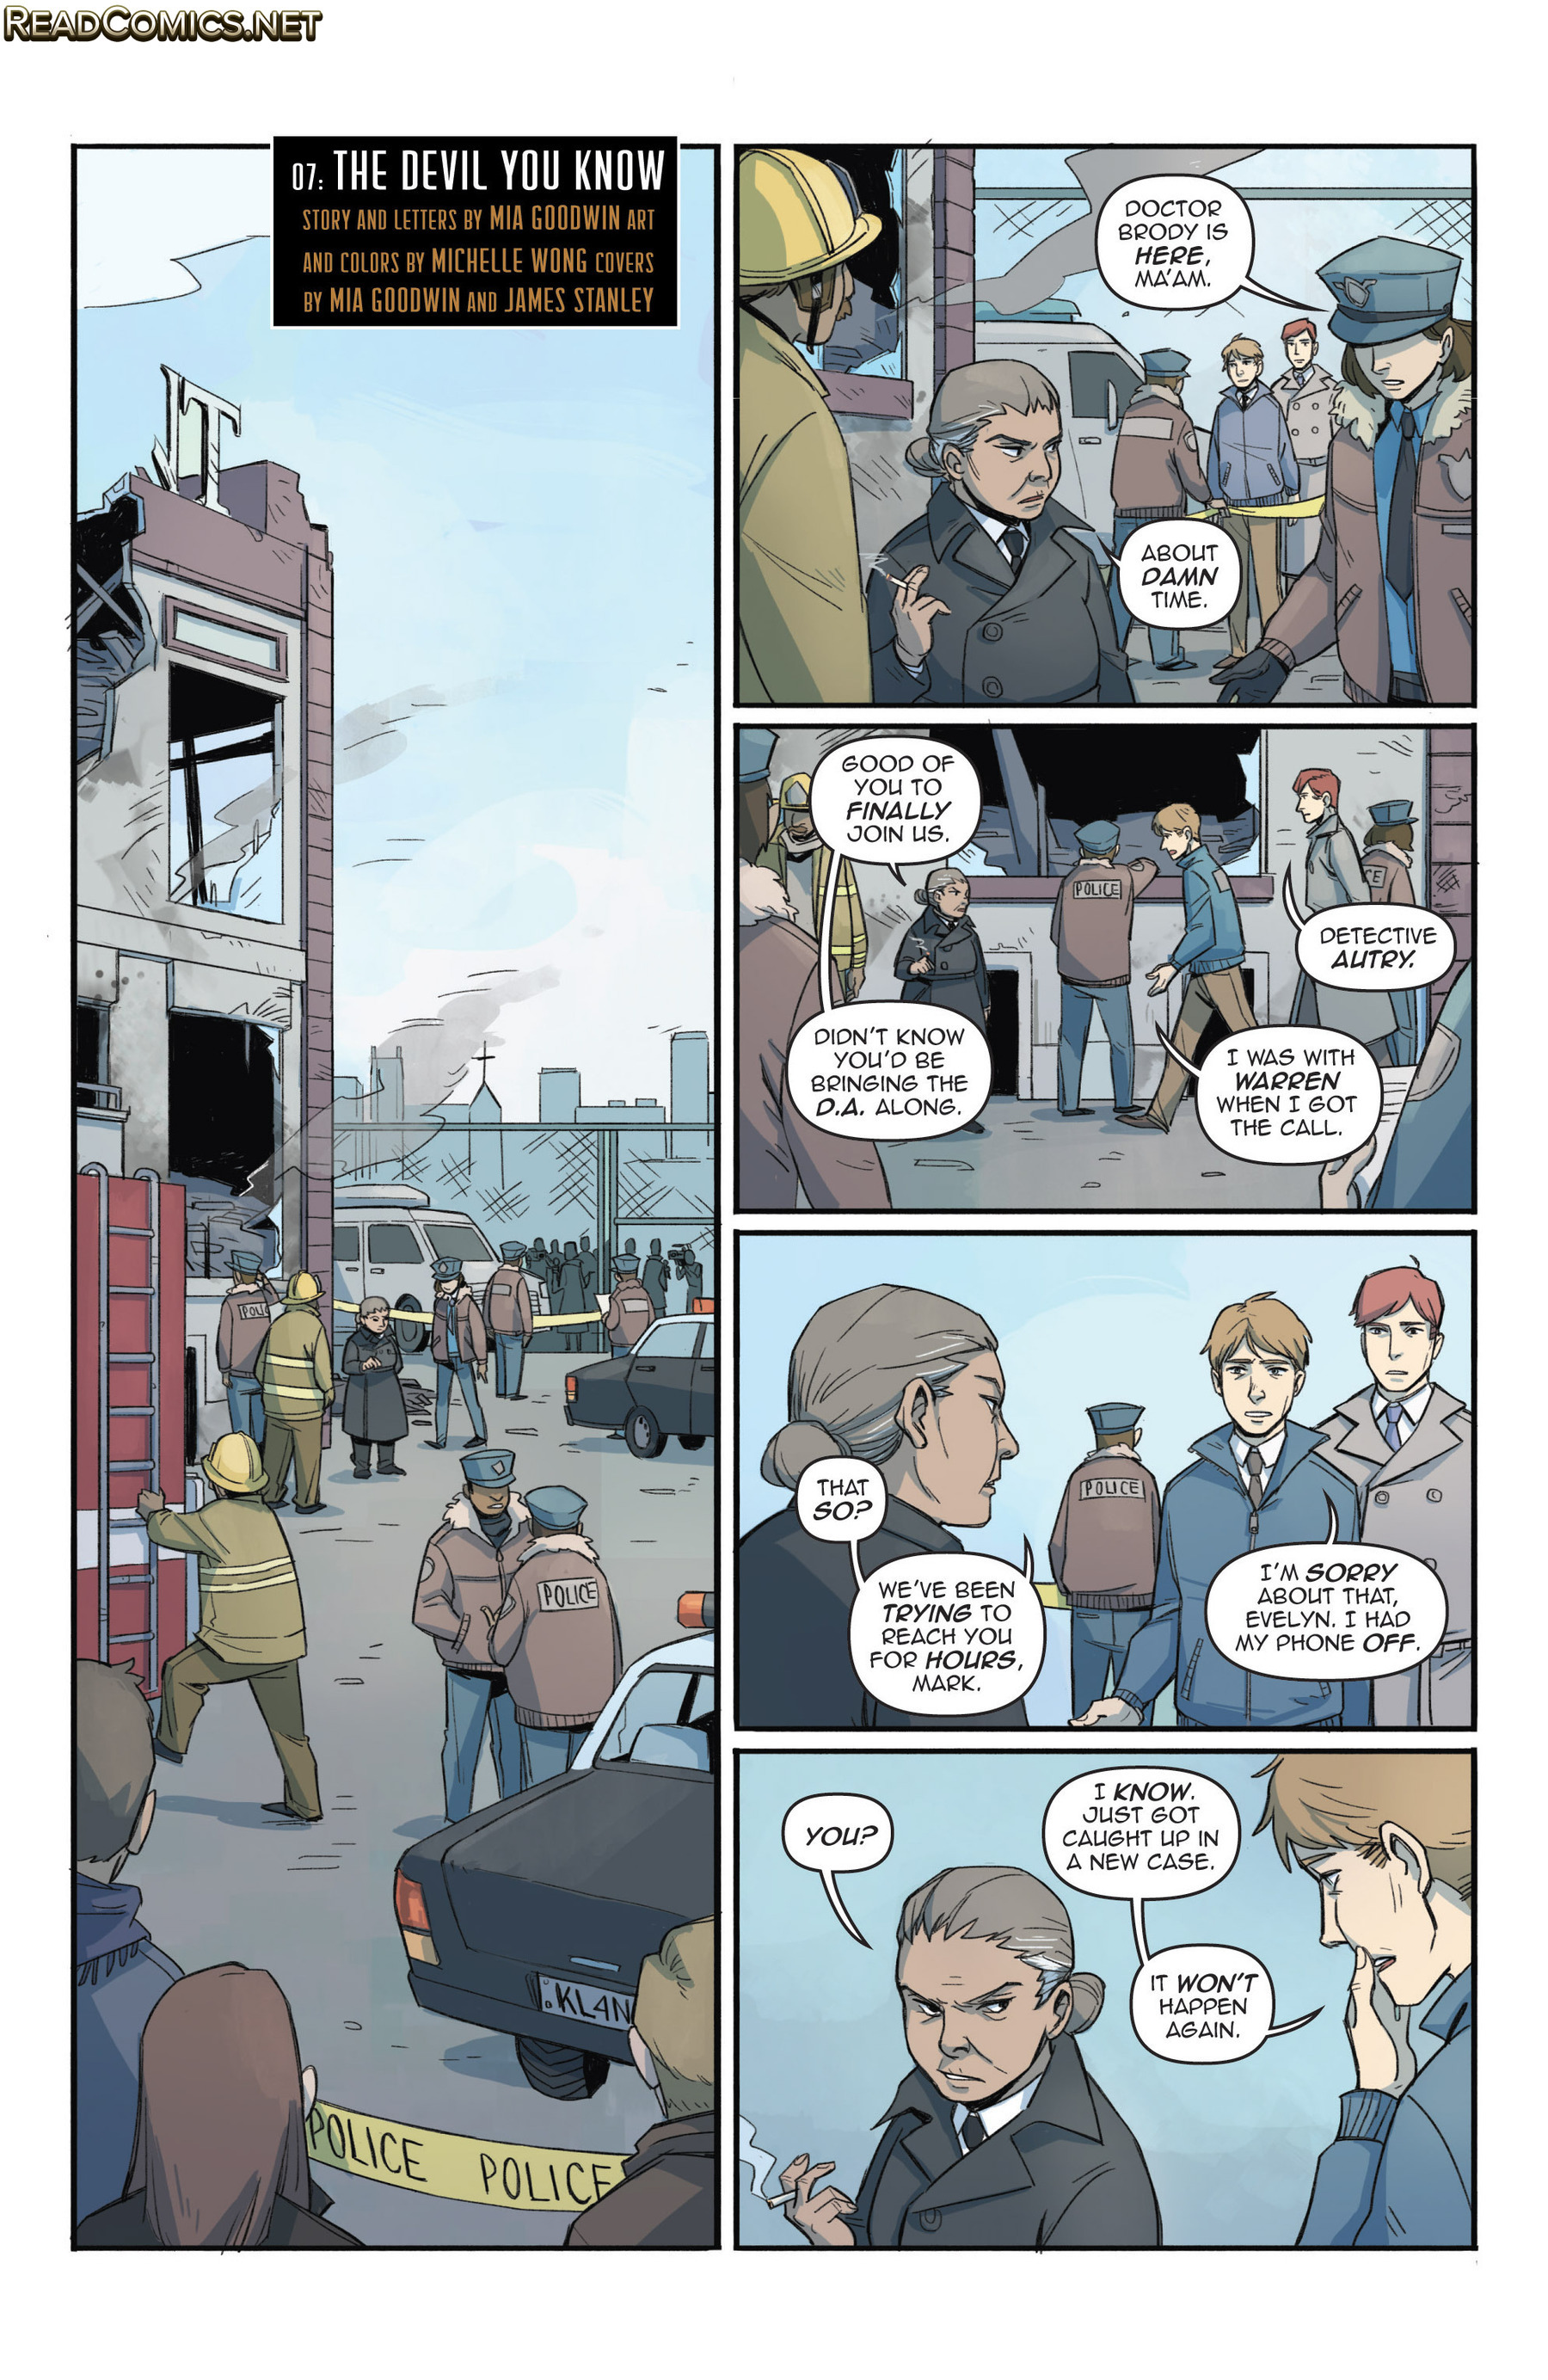 Tomboy (2015-): Chapter 7 - Page 3